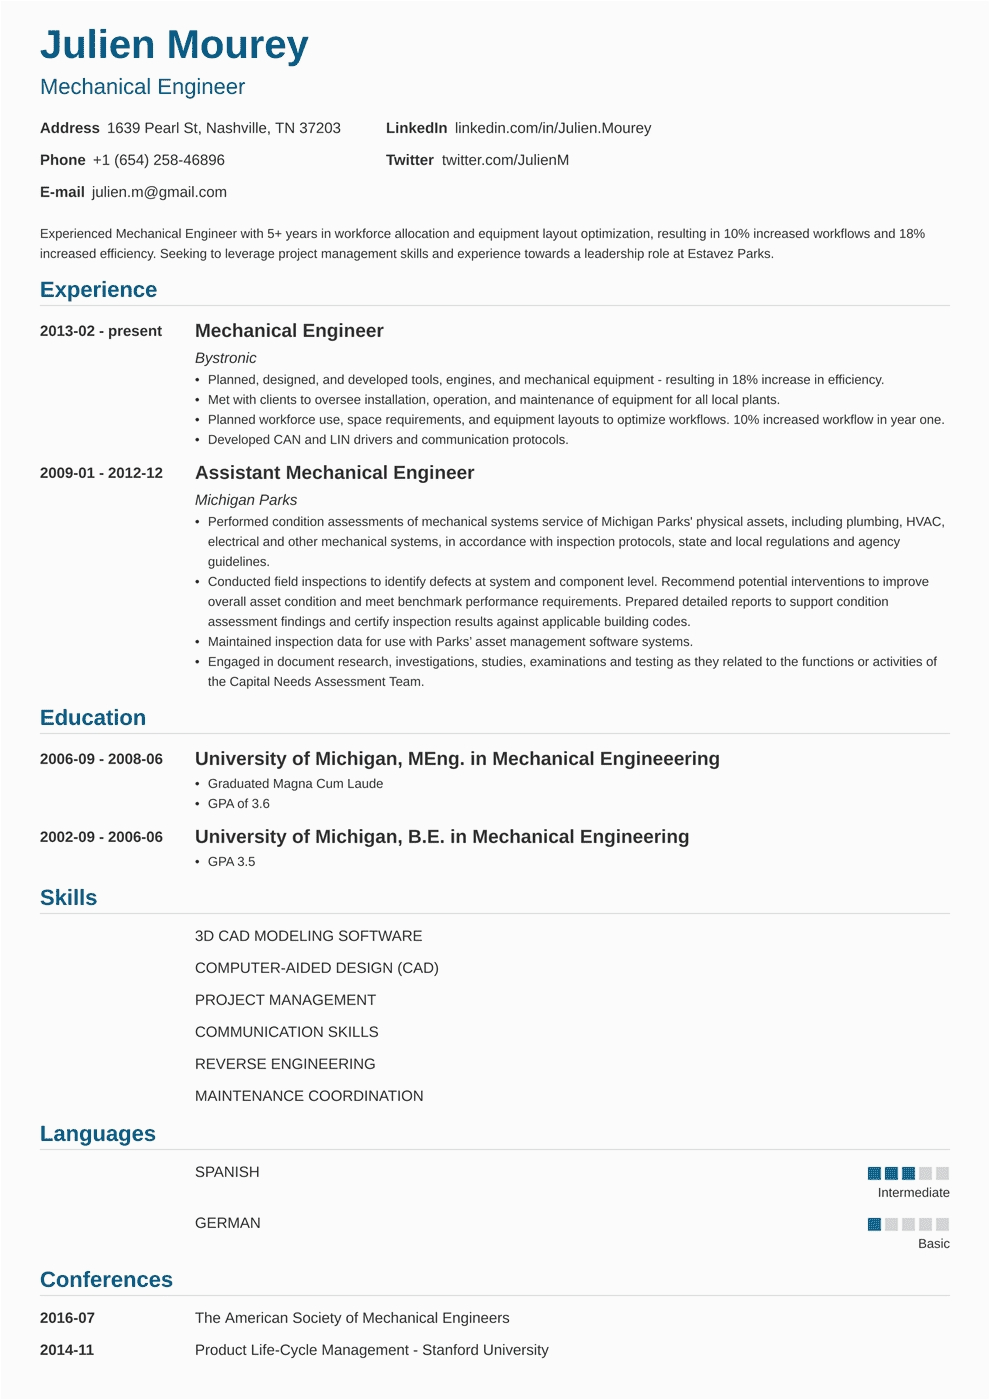 Resume Template for Mechanical Engineer Fresher solar Engineer Cv Fresher Mechanical Engineer Resume for